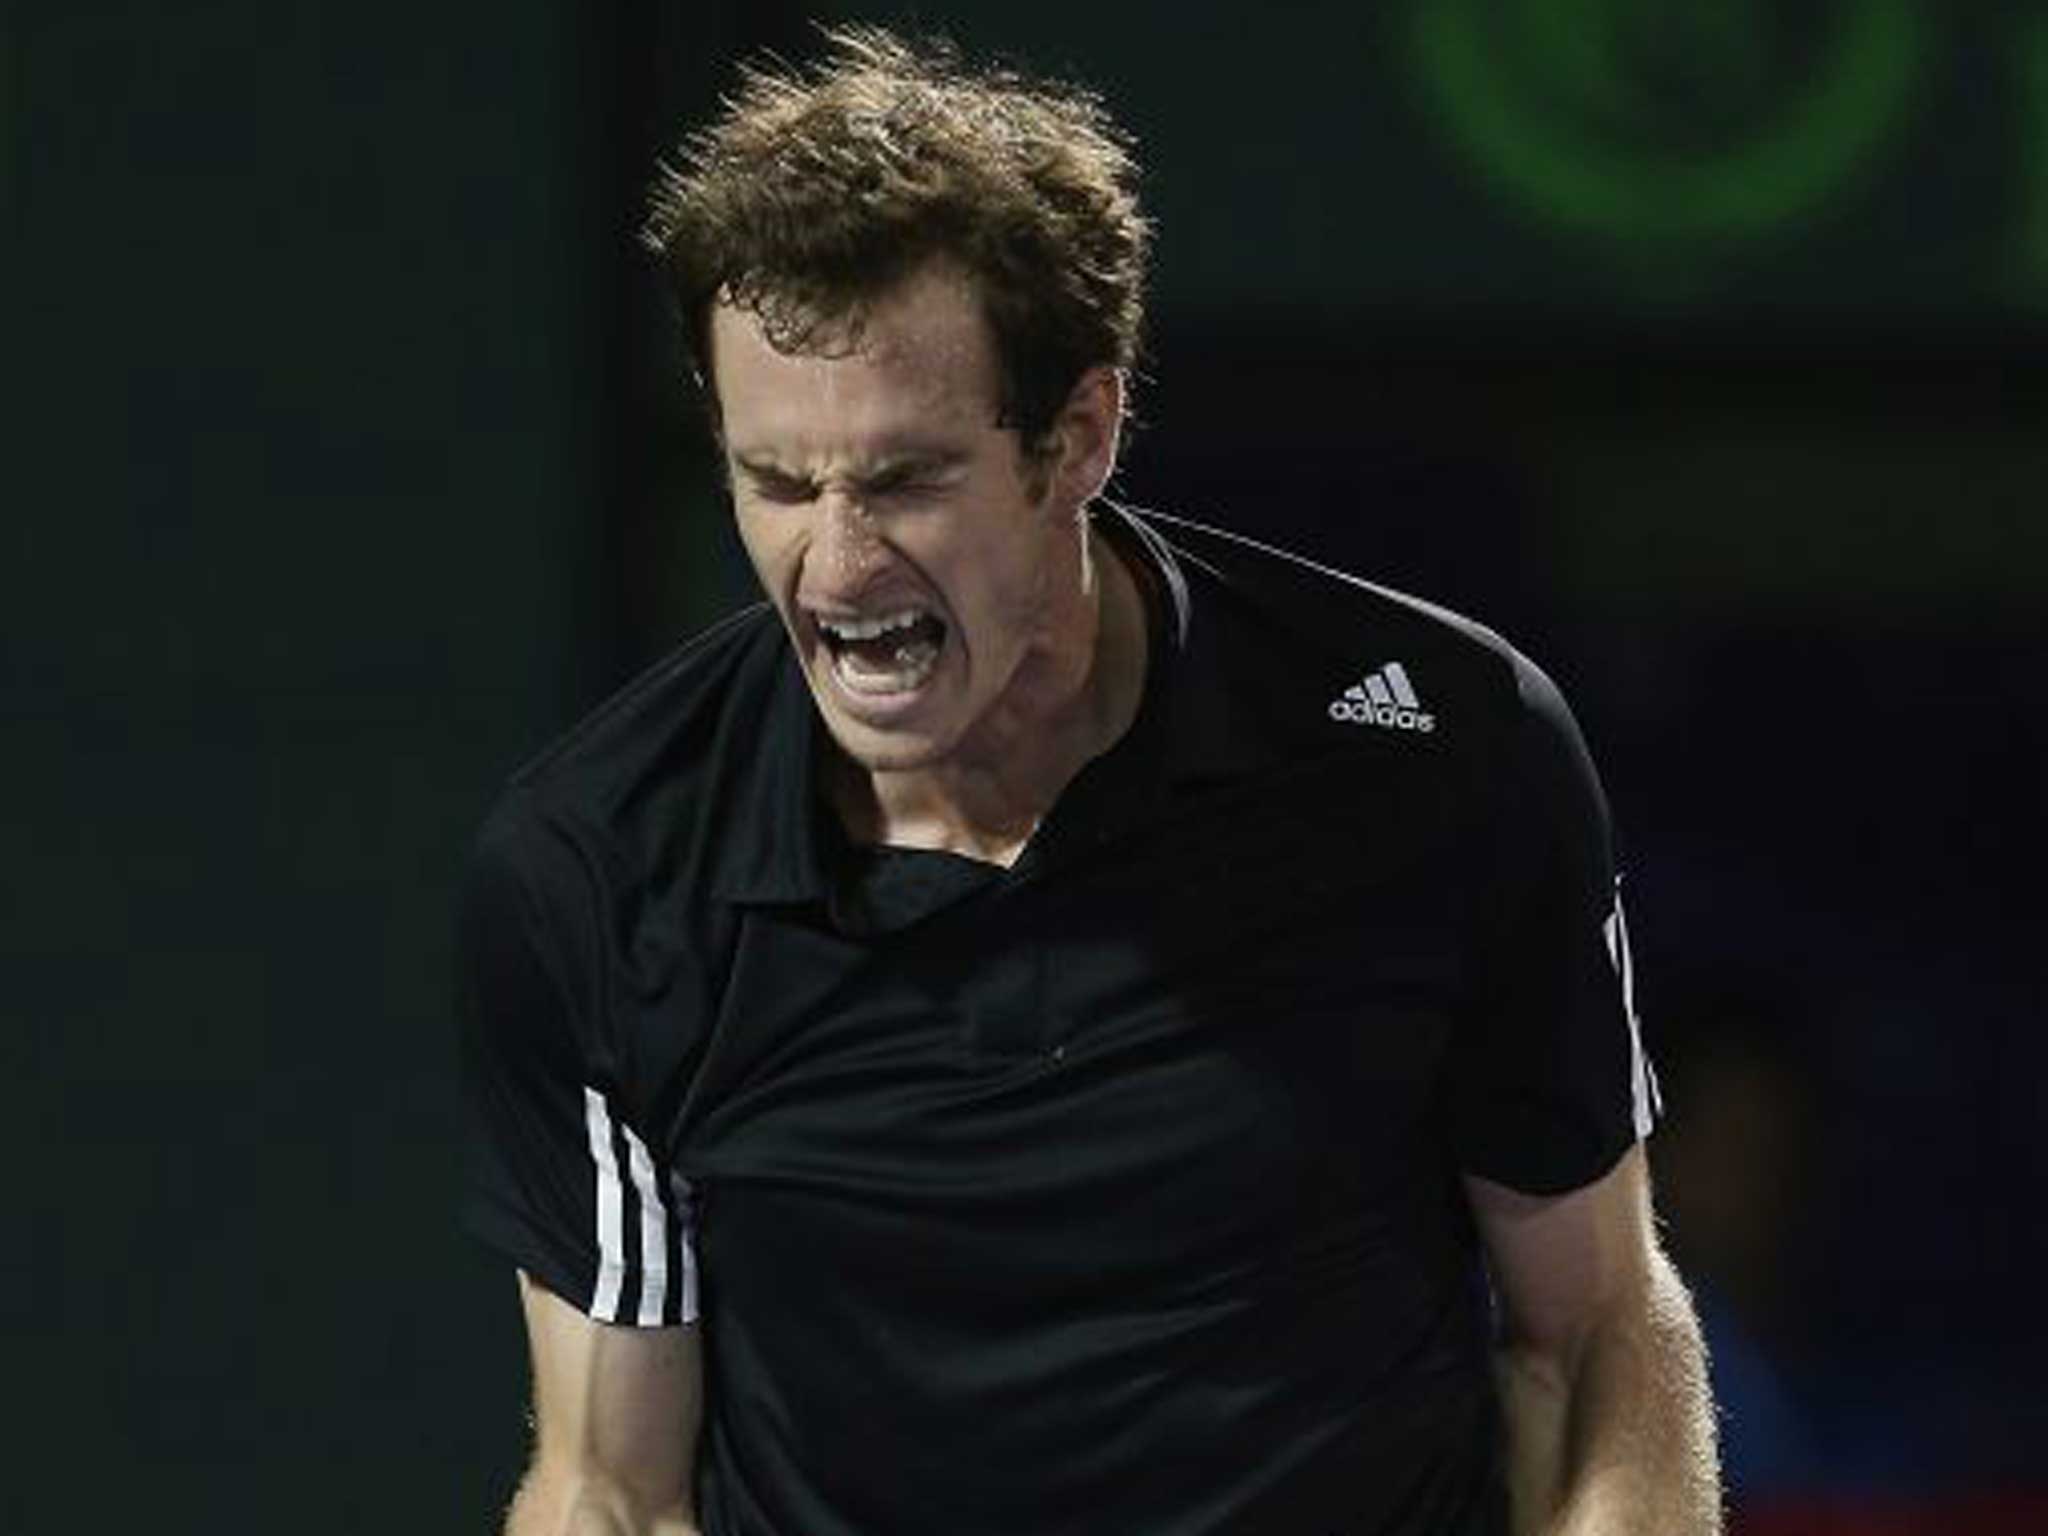 'Andy Murray's new coach has to give him confidence,' says the man